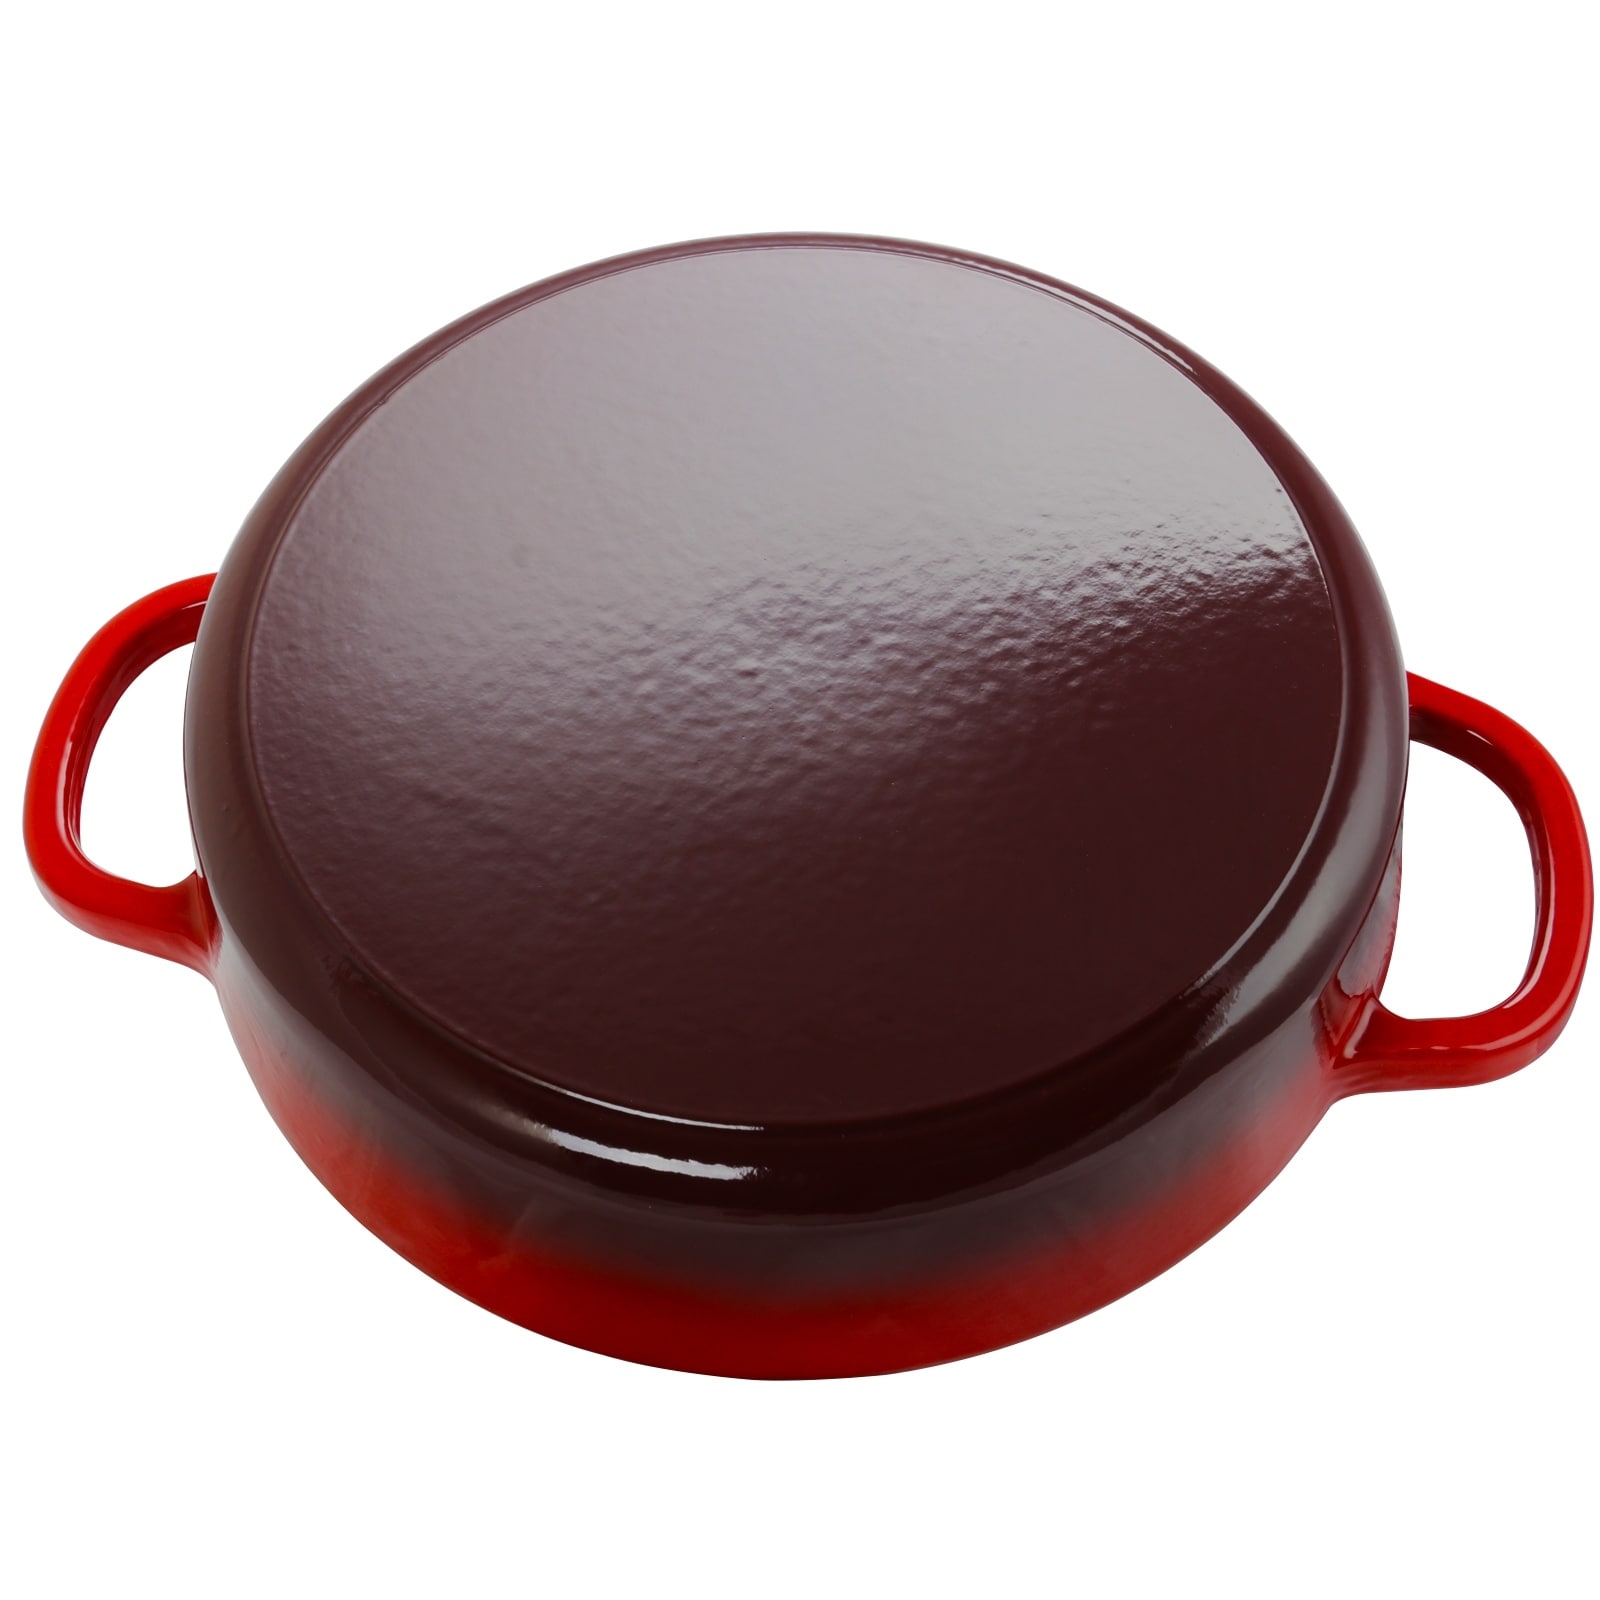 https://ak1.ostkcdn.com/images/products/is/images/direct/b706514437f4b55e7a1c98f903cdc71a6a5584bc/Enameled-Cast-Iron-5-Quart-Round-Braising-Pan-W--Lid-in-Ruby.jpg